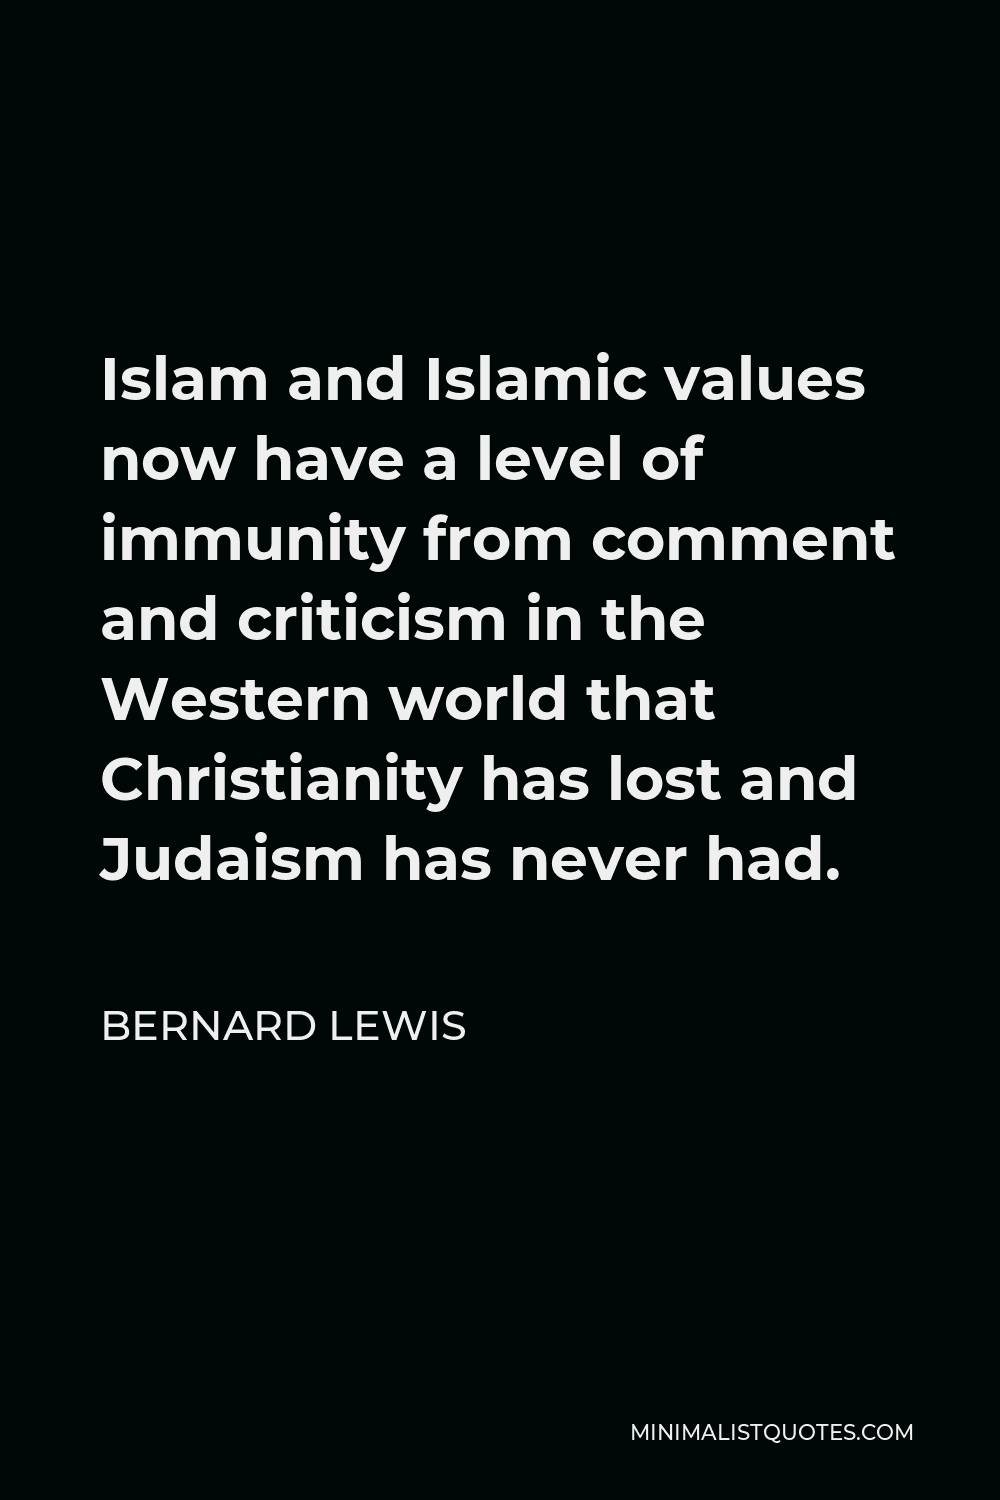 Bernard Lewis Quote - Islam and Islamic values now have a level of immunity from comment and criticism in the Western world that Christianity has lost and Judaism has never had.